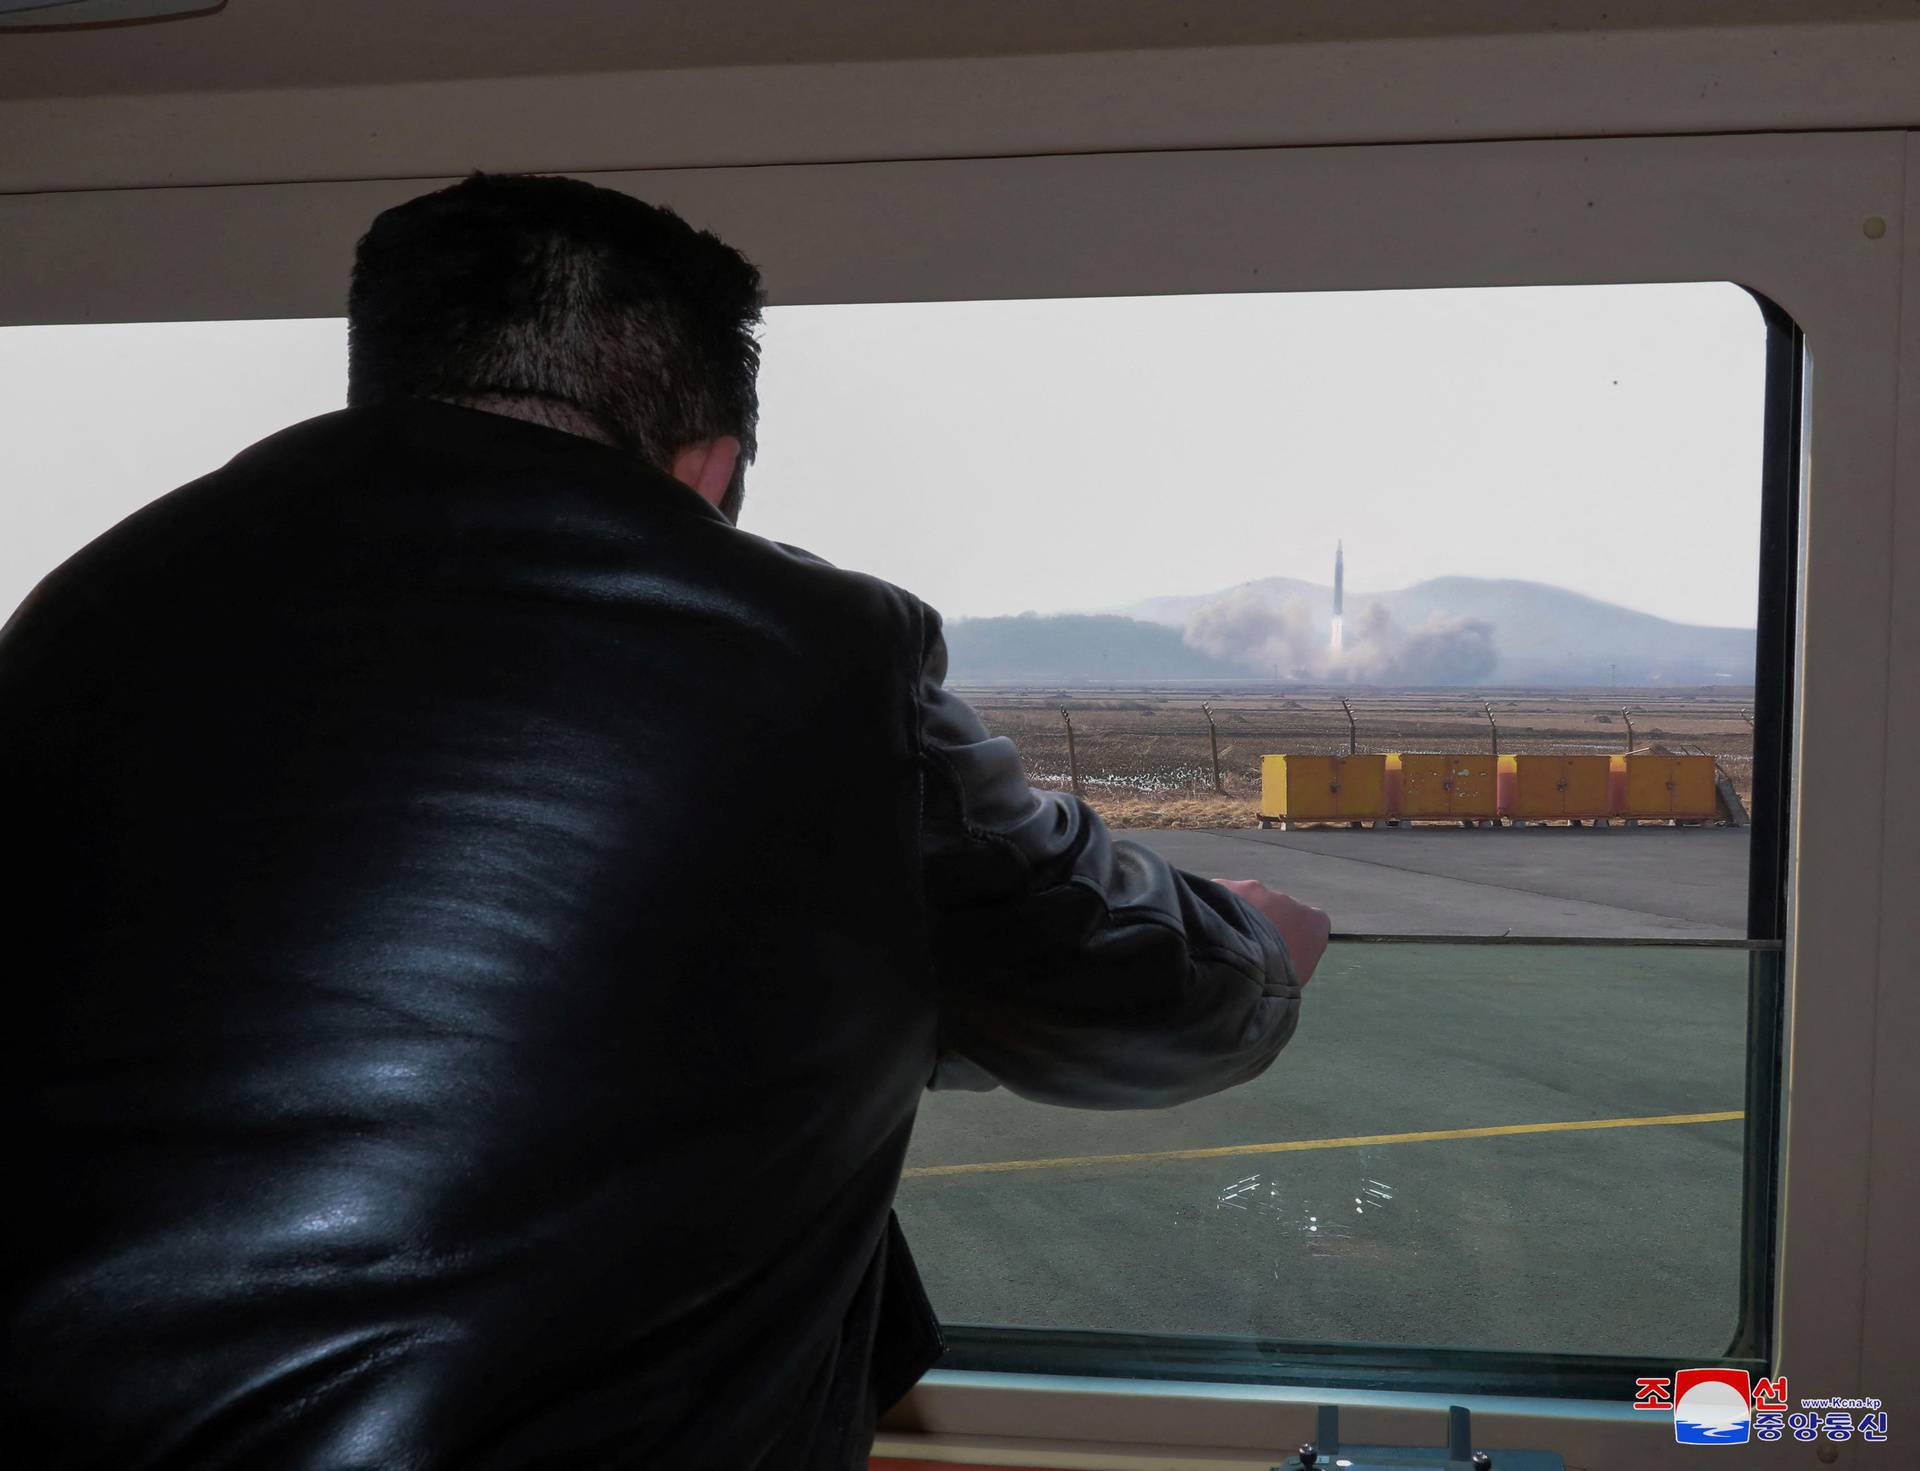 North Korean leader Kim Jong Un looks through a window during the test firing of what state media report is a "new type" of intercontinental ballistic missile (ICBM)